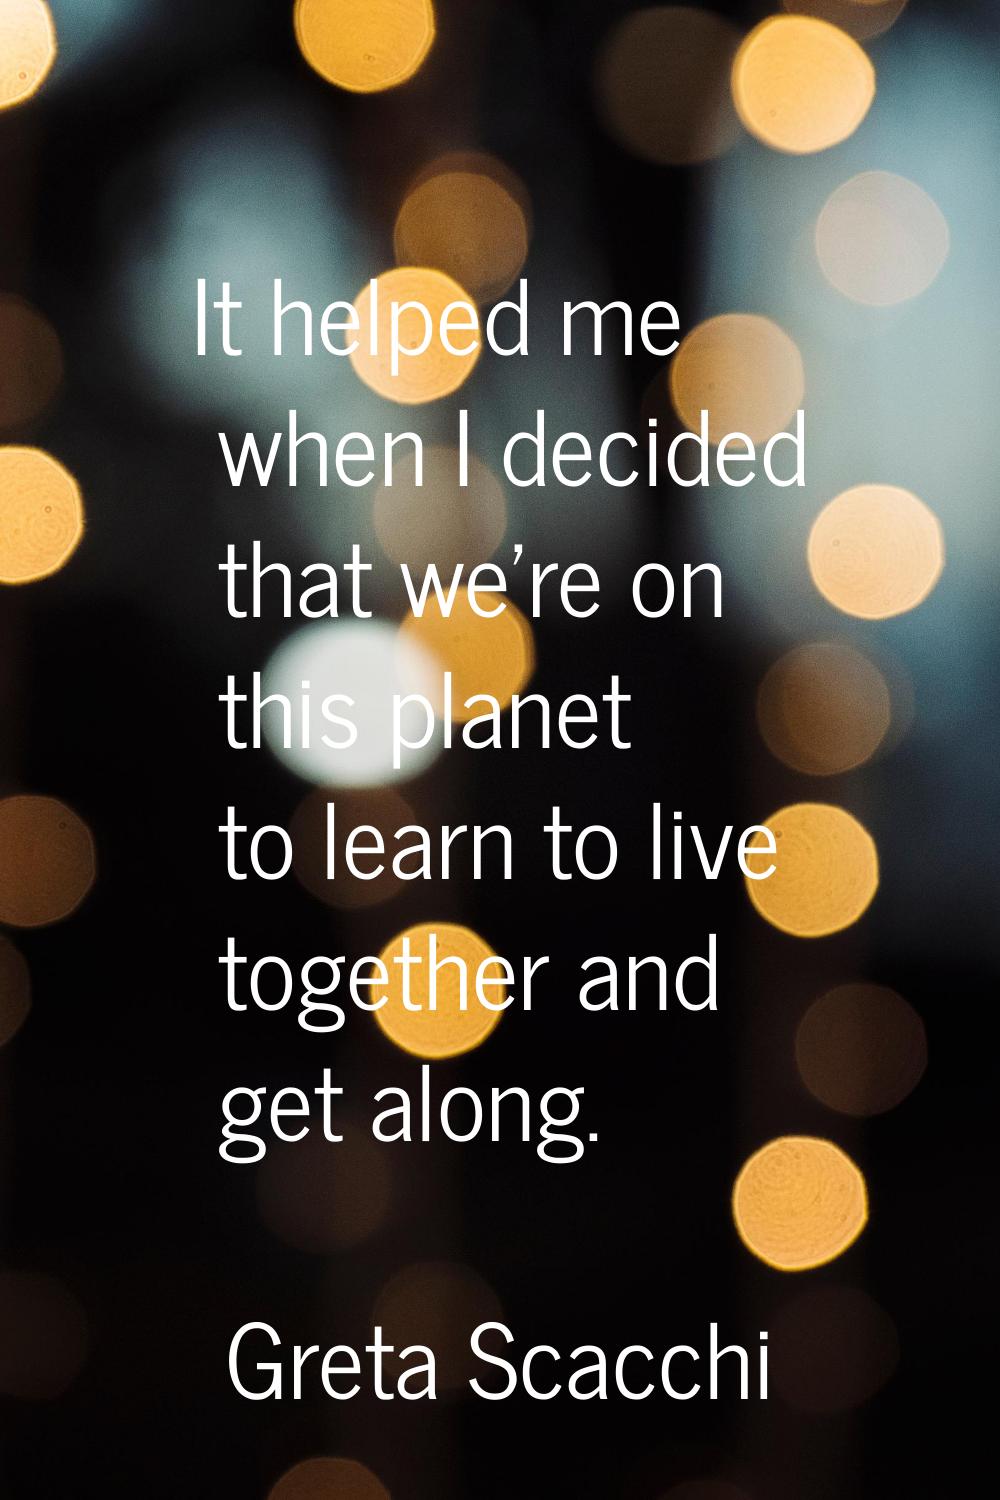 It helped me when I decided that we're on this planet to learn to live together and get along.